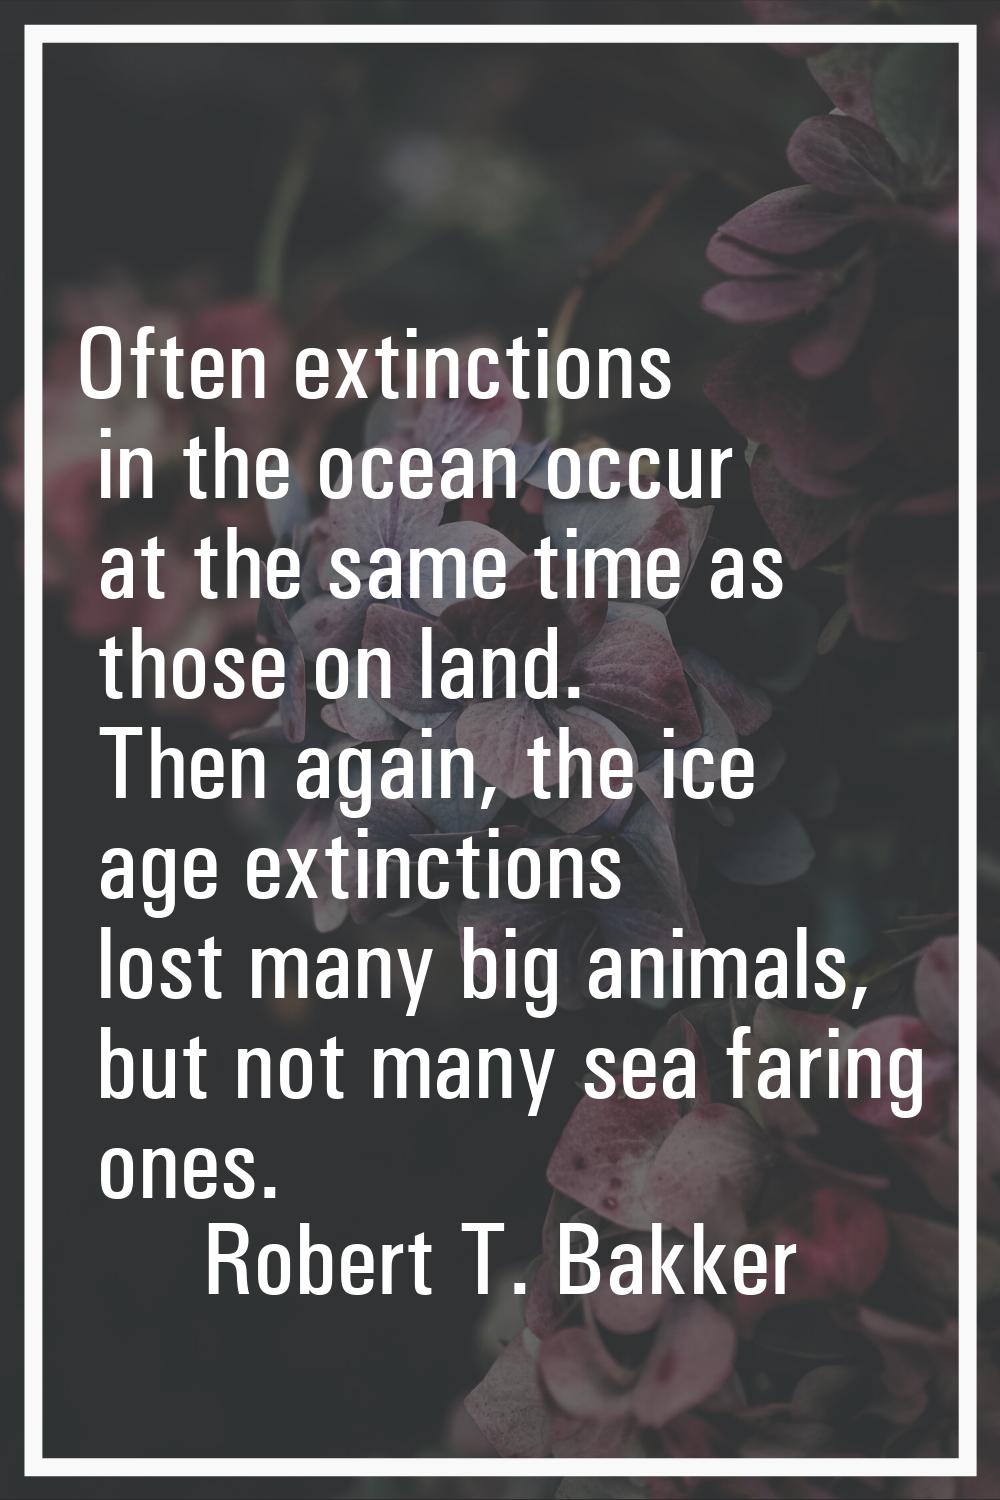 Often extinctions in the ocean occur at the same time as those on land. Then again, the ice age ext